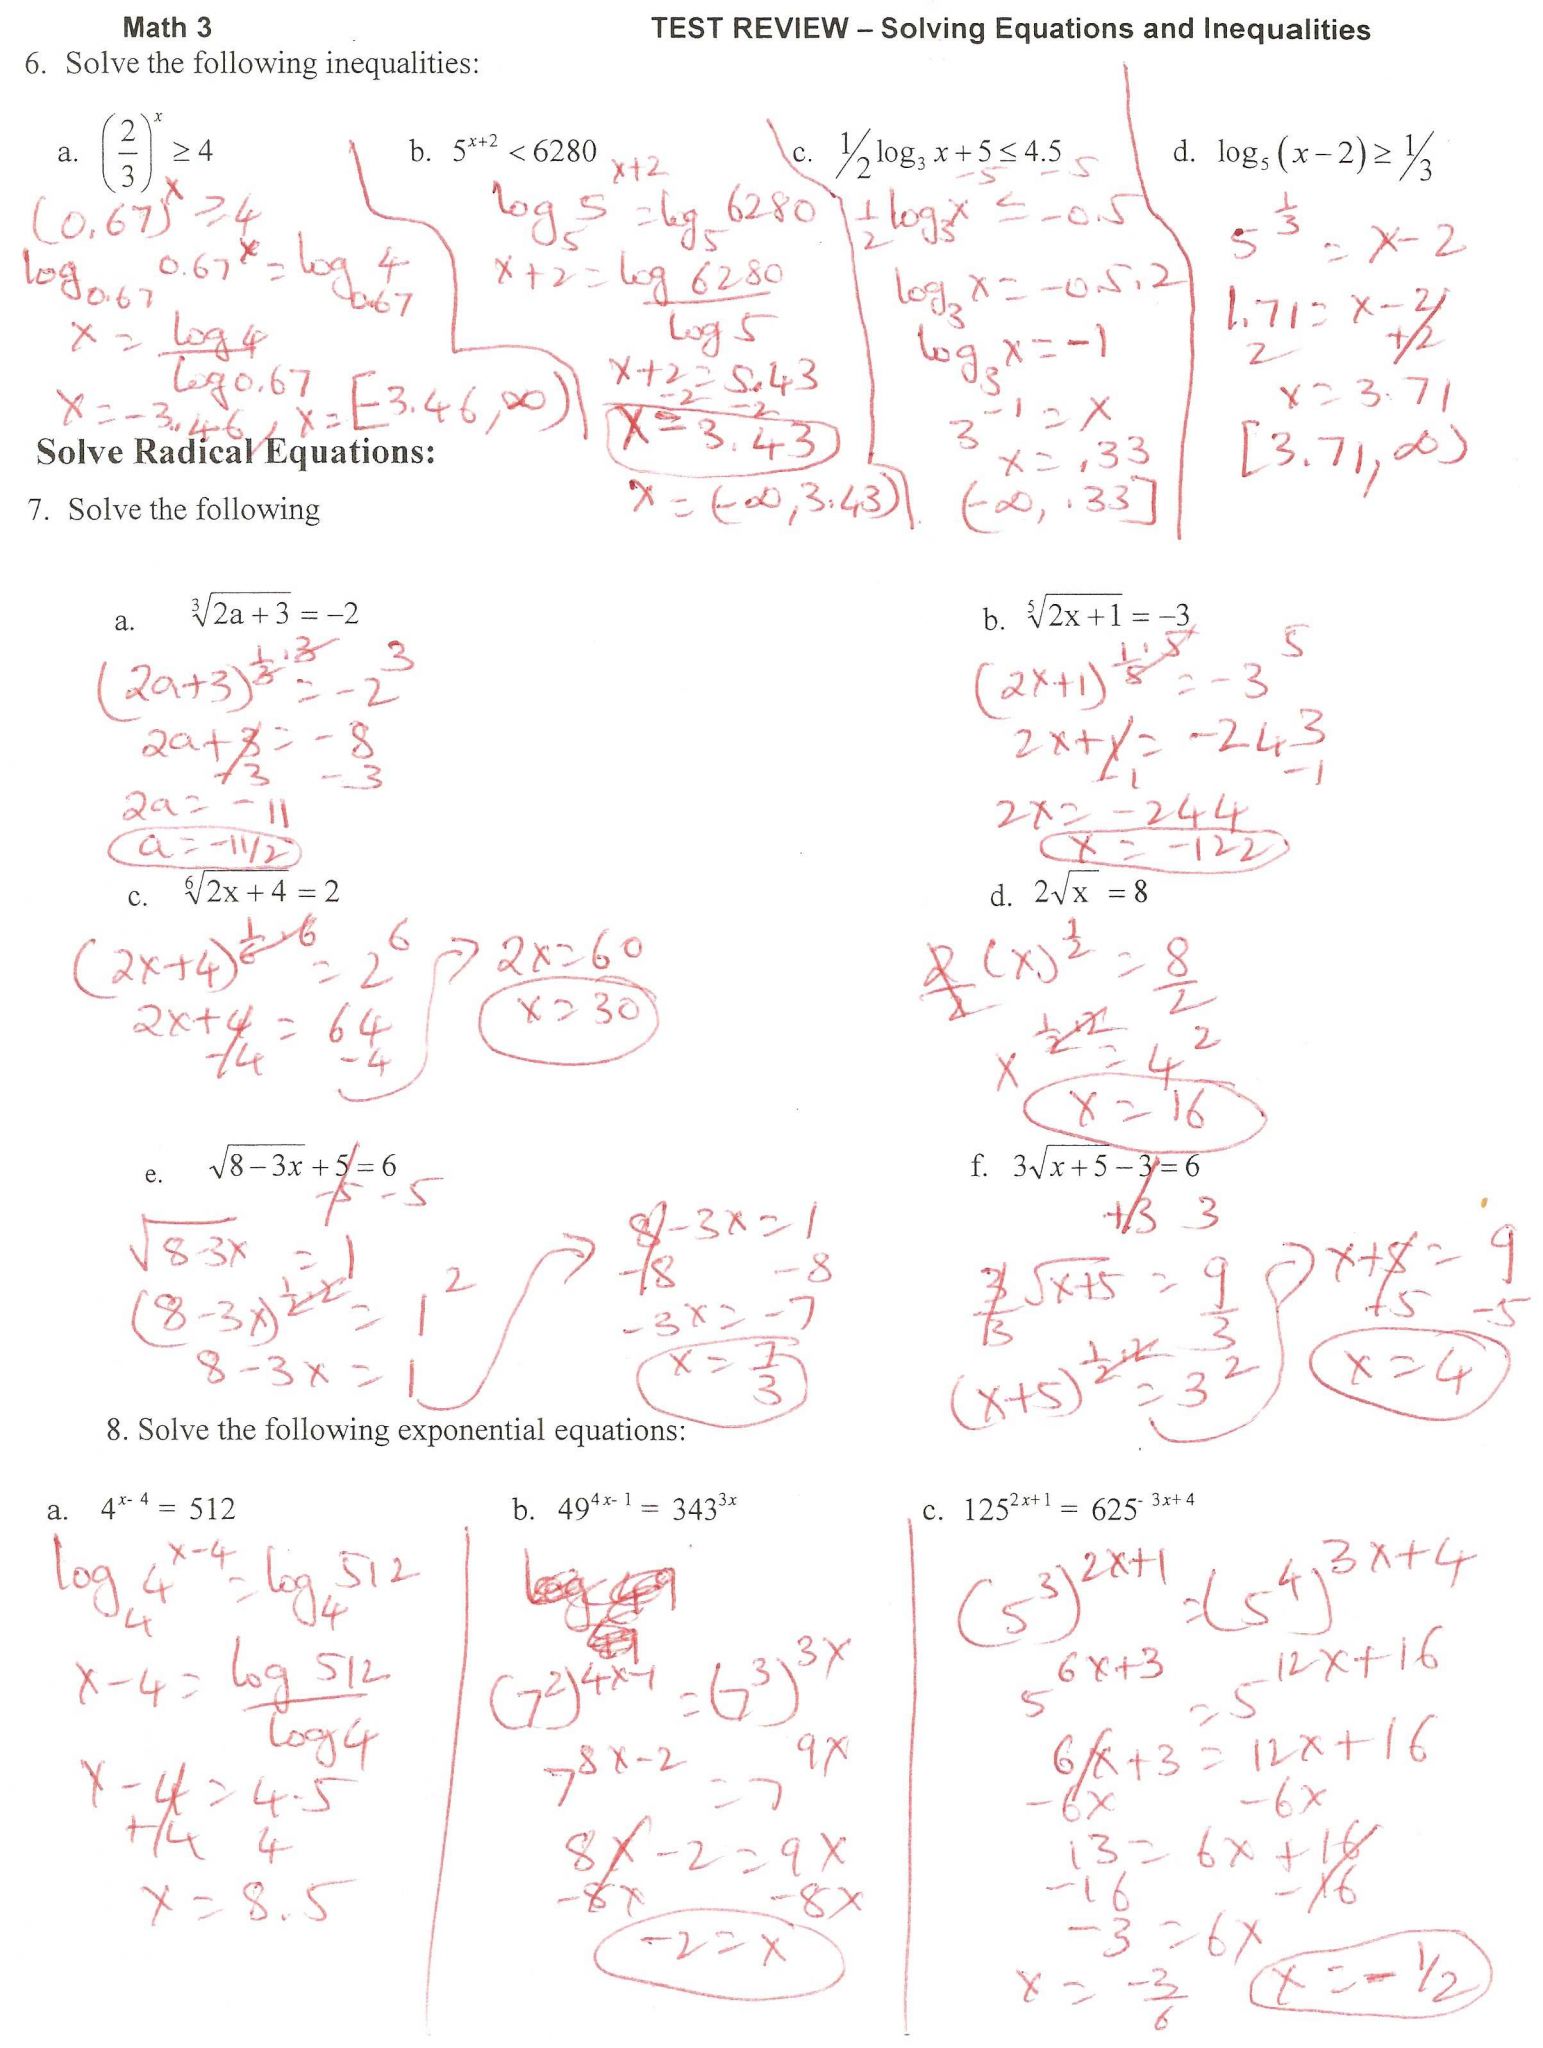 Solving Exponential Equations Worksheet Along with solving Exponential Equations without Logarithms Worksheet Awesome